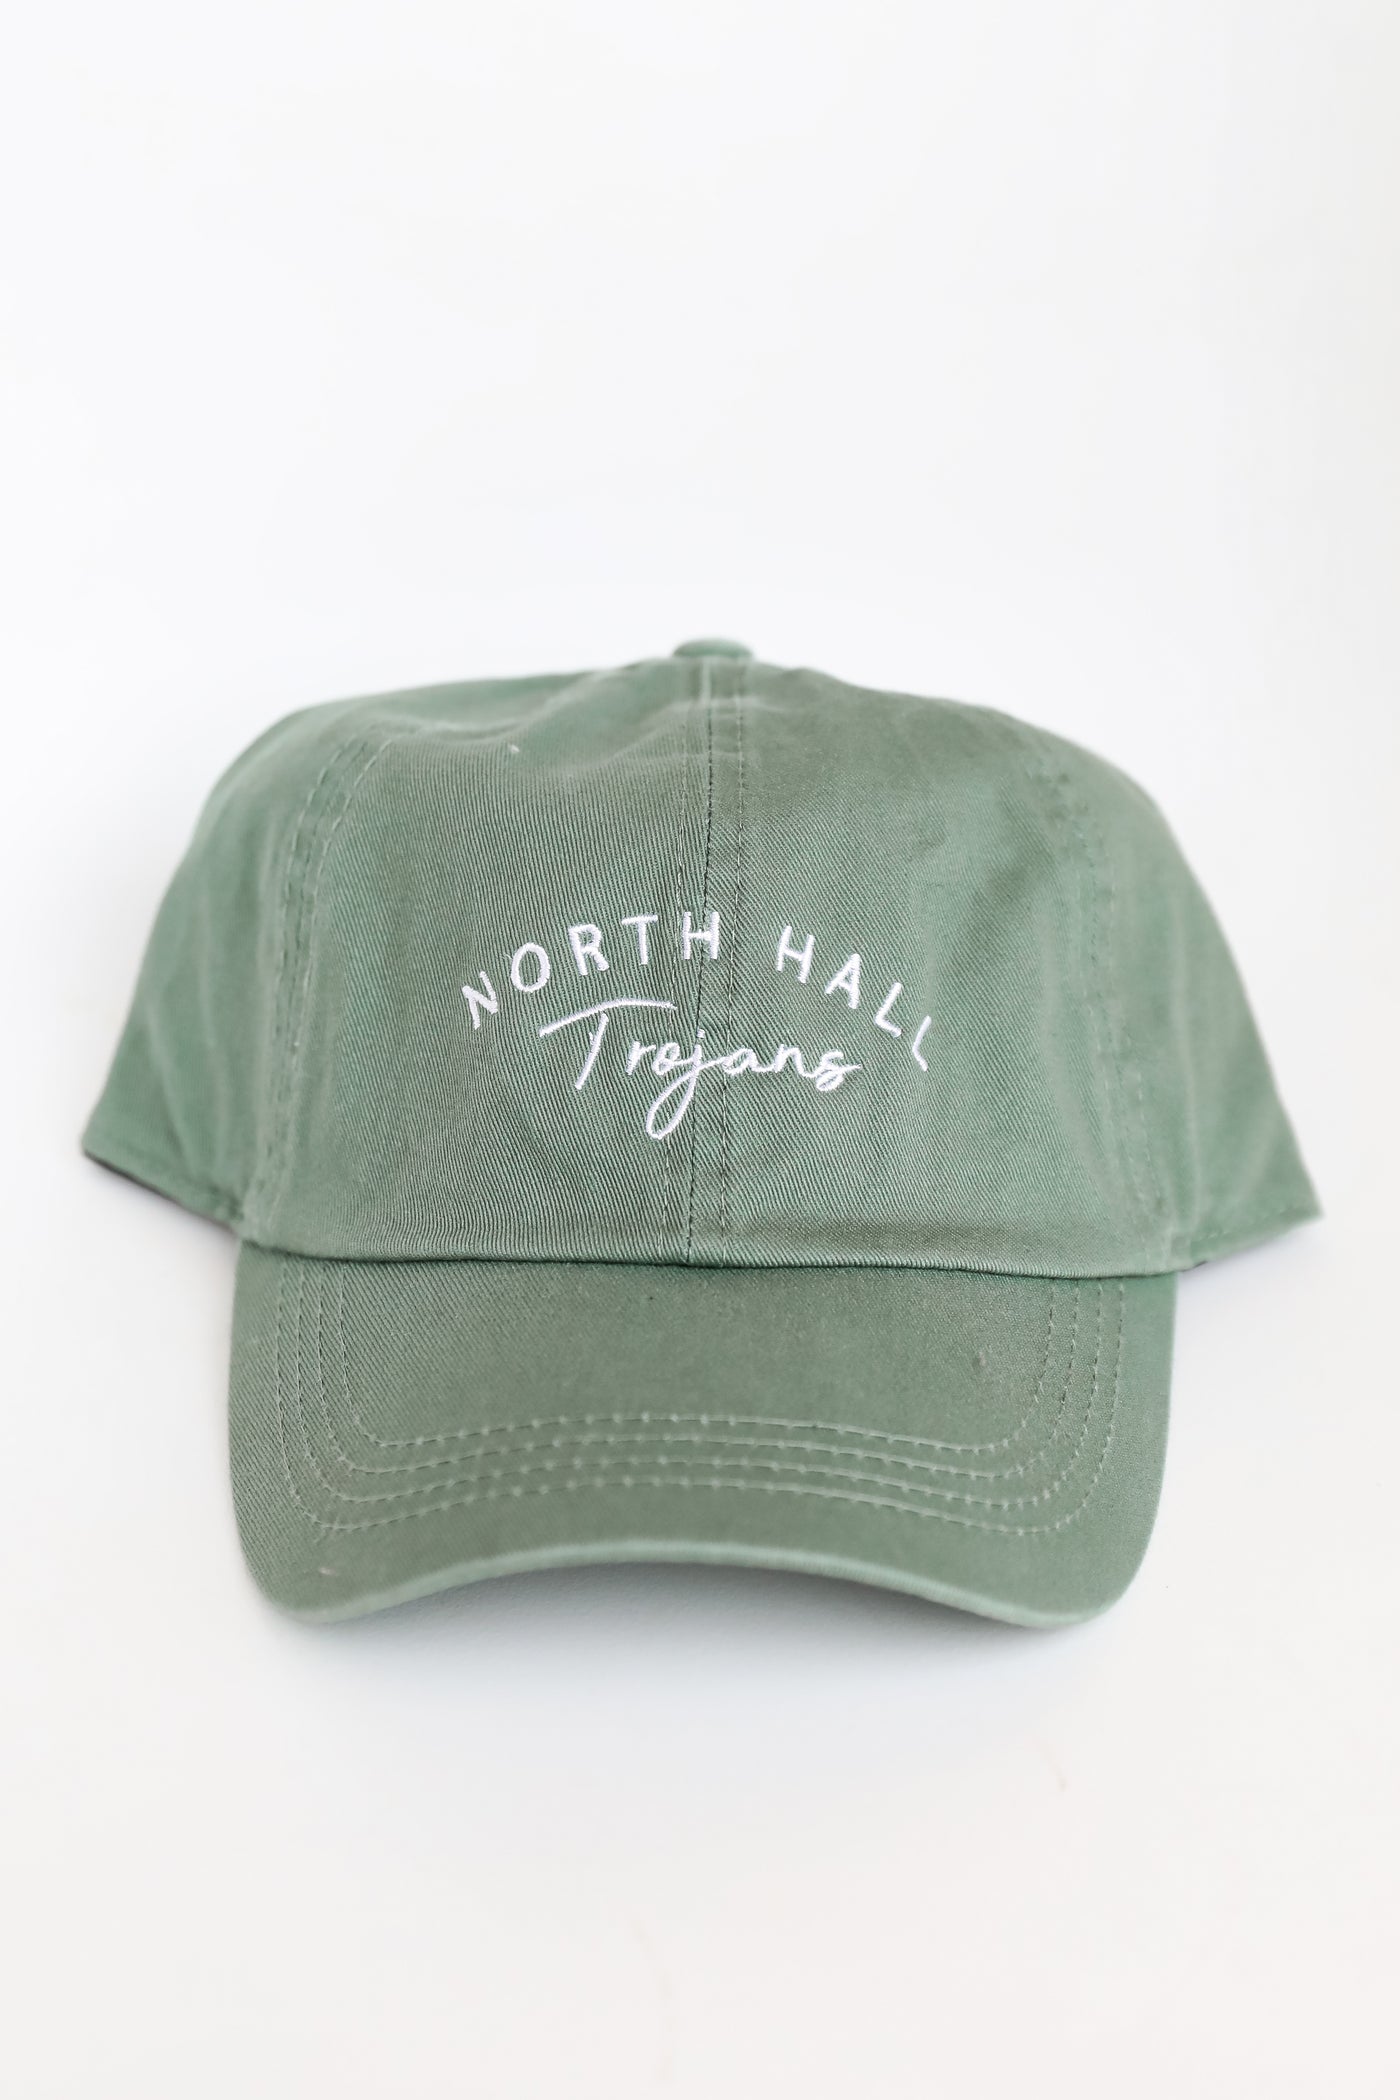 Green North Hall Trojans Embroidered Hat flat lay